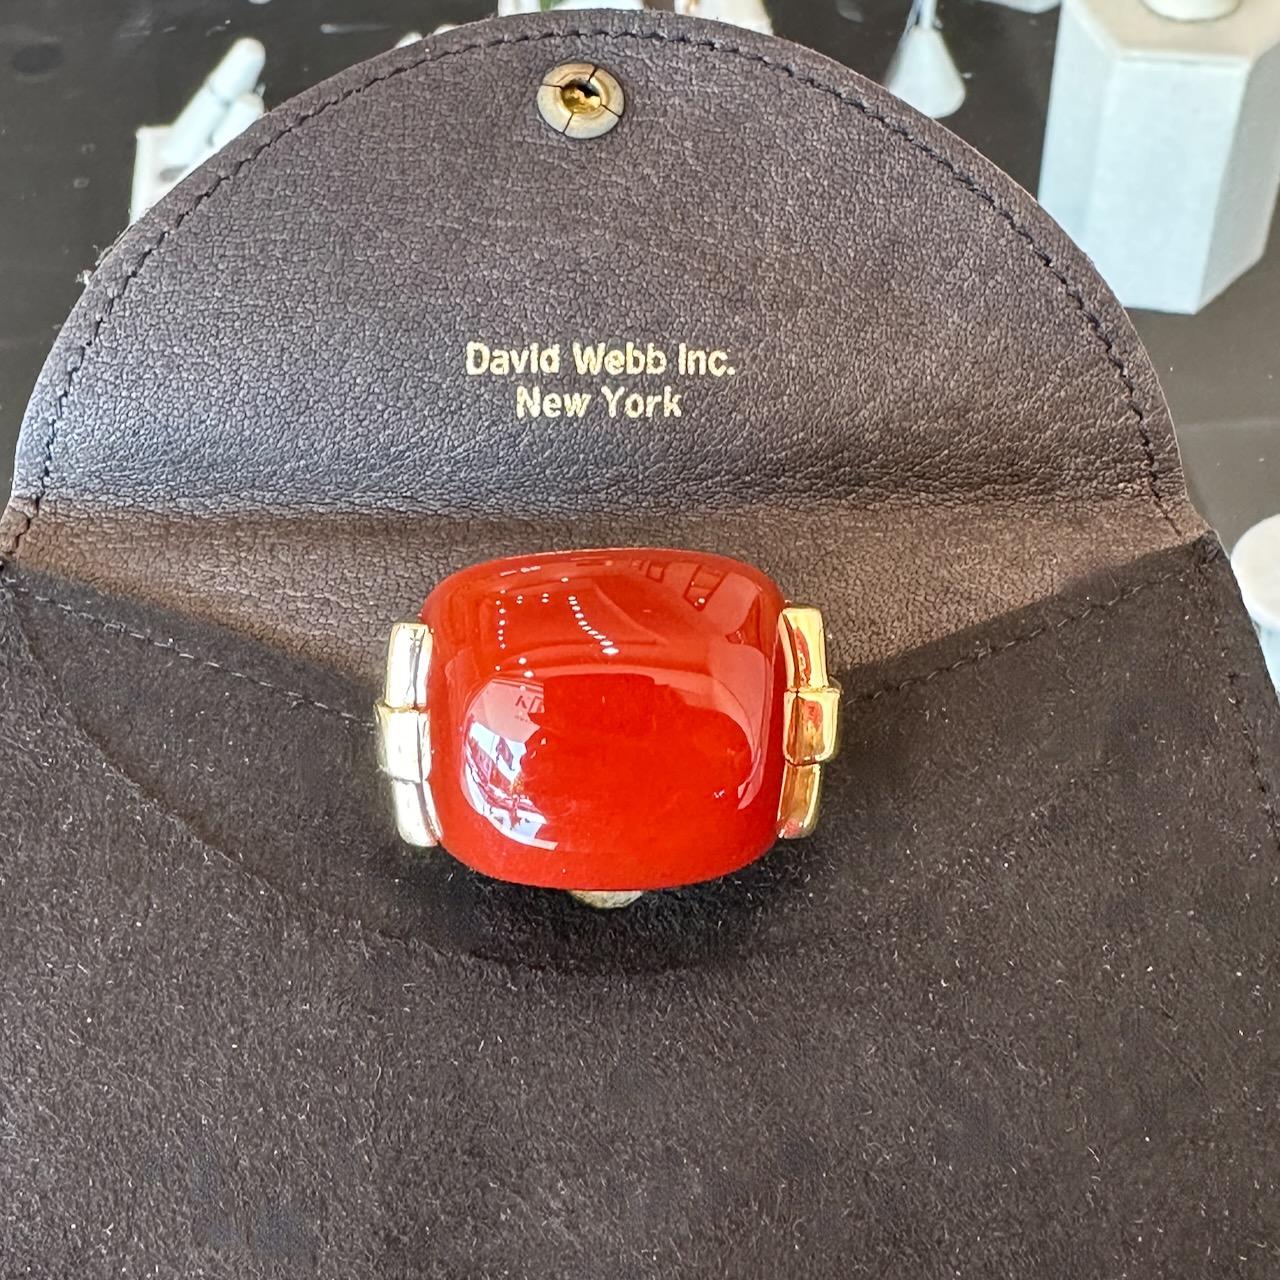 This vintage David Webb carnelian cabochon cocktail rings dates from the 1960’s and is crafted in 18KT yellow gold. The top of the ring measures 36mm x 26mm and its profile sits 38mm high. The ring is a size 5 with an adjustable ring guard inside.